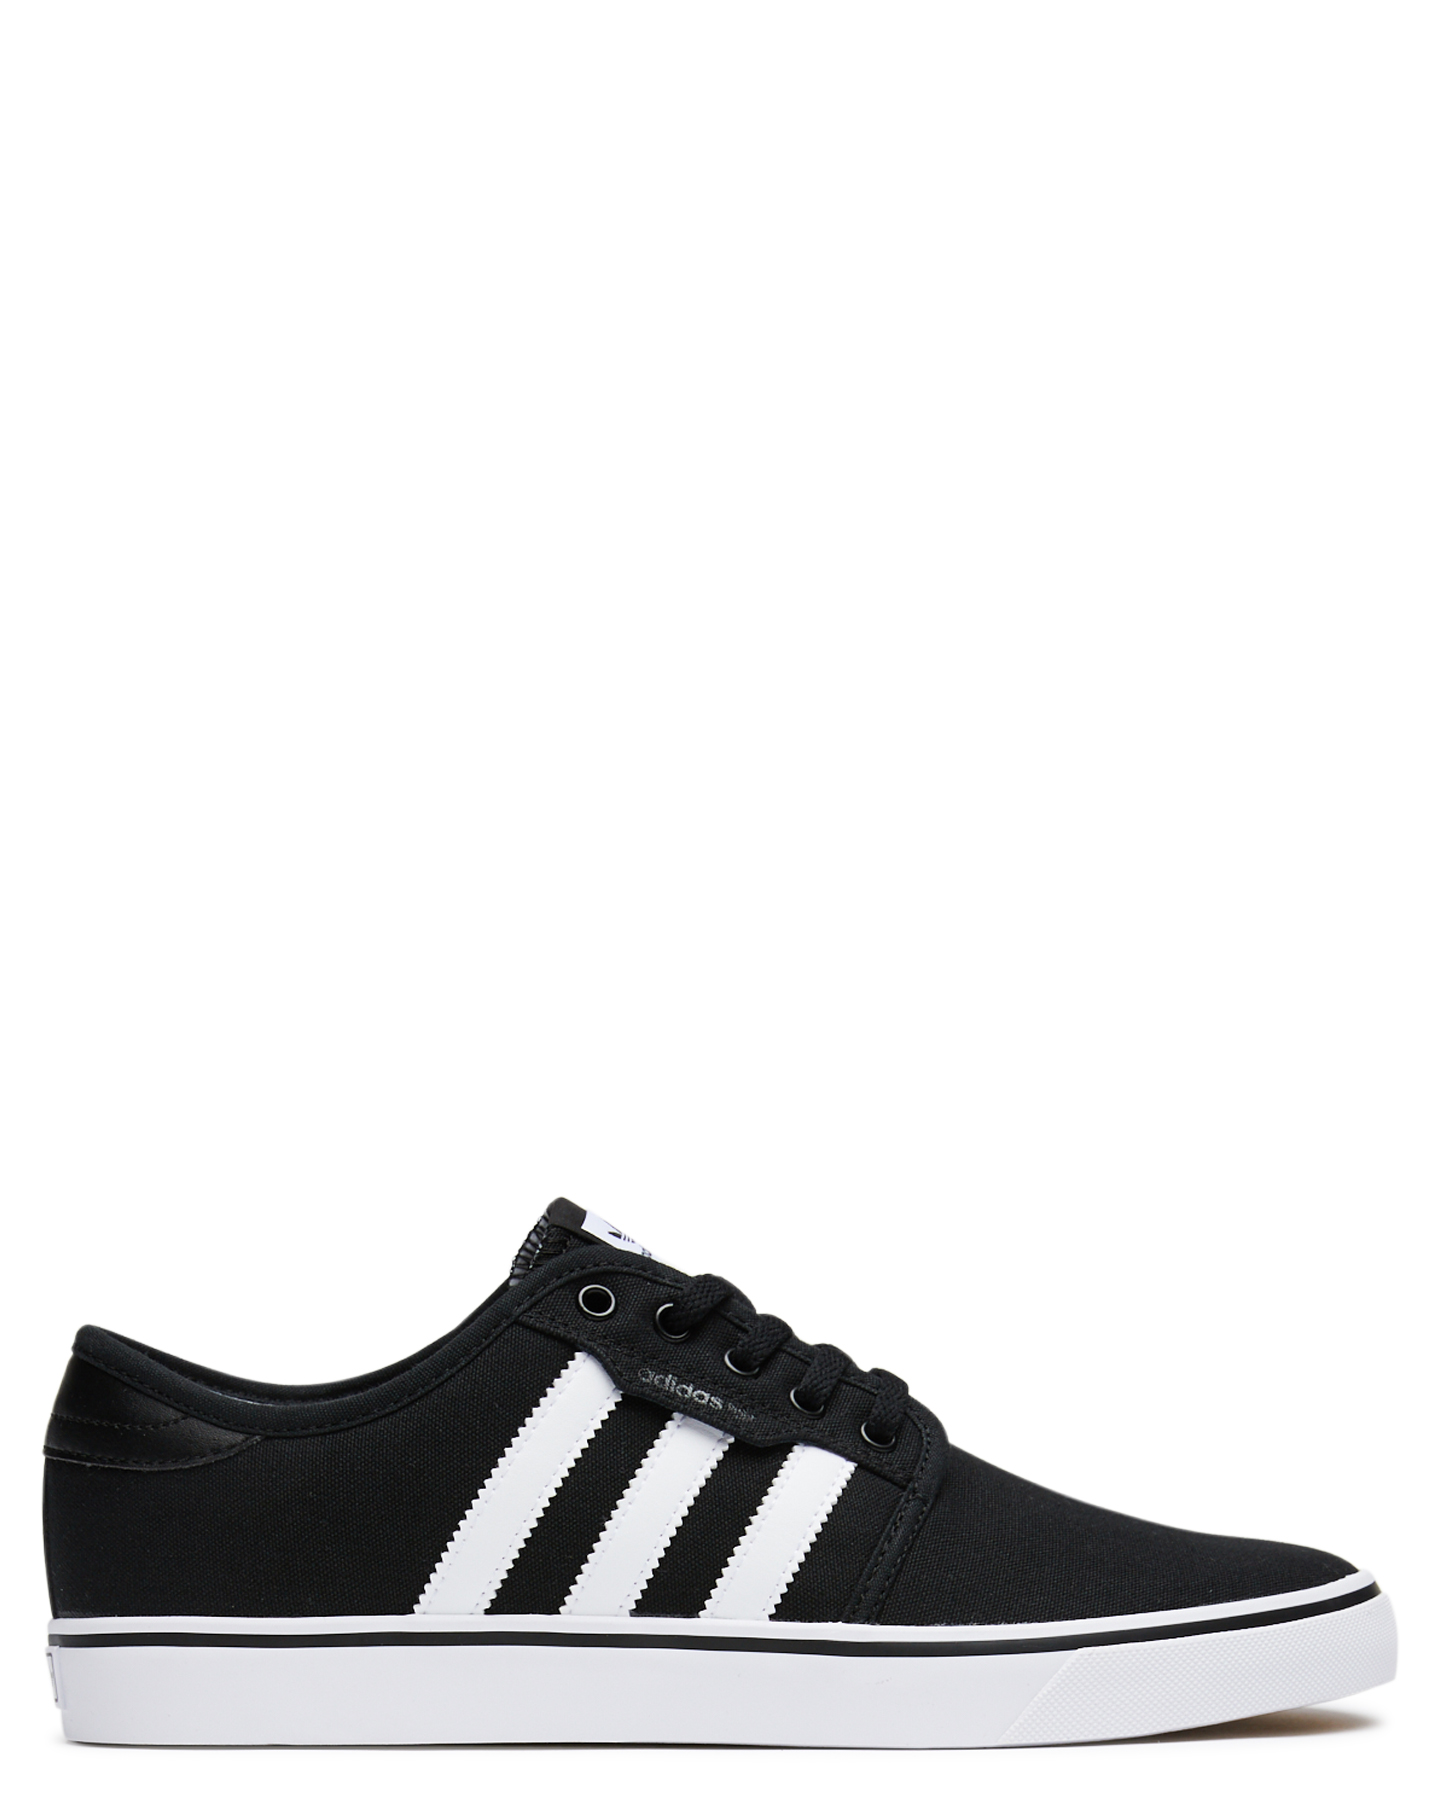 women's black and white adidas shoes